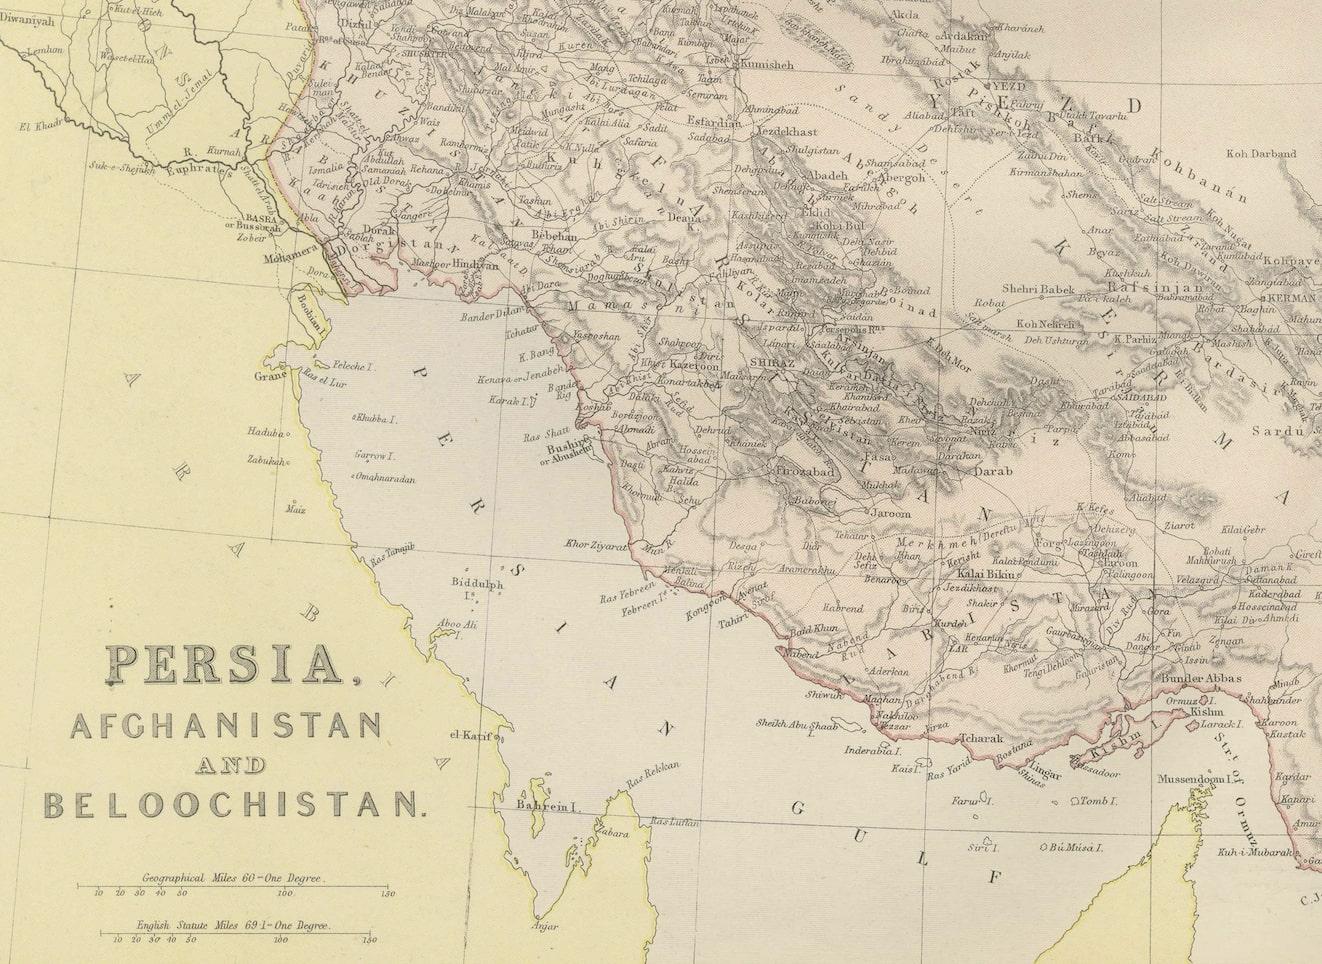 This map, sourced from the comprehensive 1882 atlas by Blackie & Son, delineates the southern part of Russia and the Caucasus region, reflecting the geopolitical contours and topographical details of the area as known in the late 19th century.

The